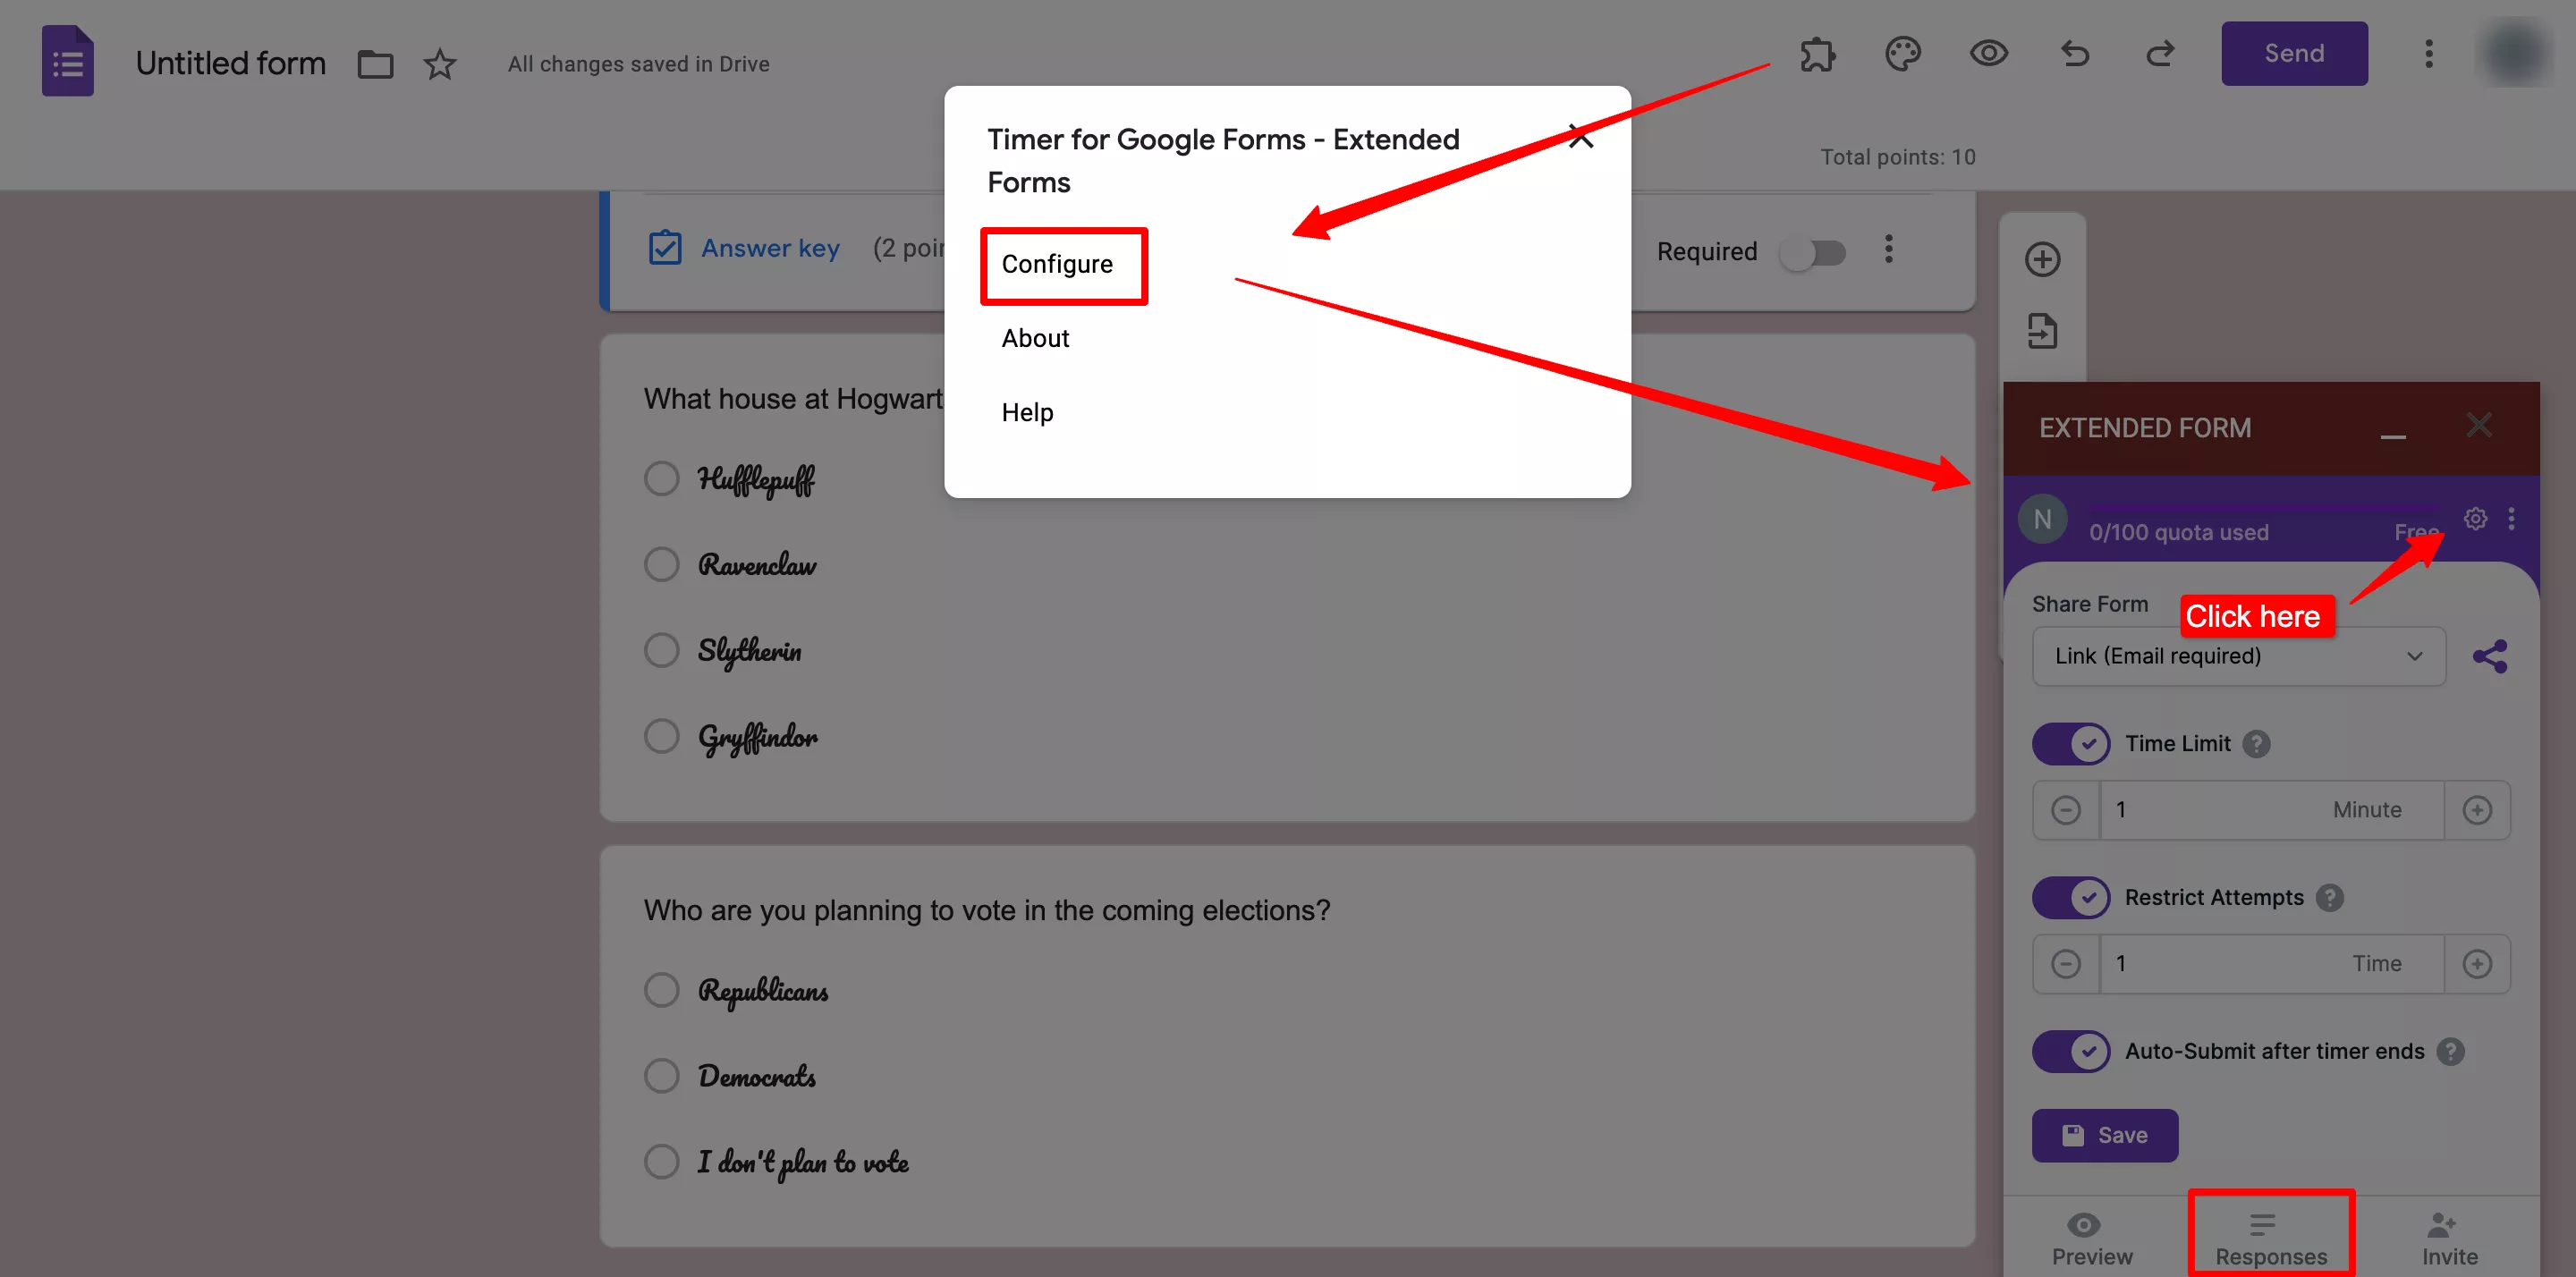 prevent cheating in google forms - Extendedforms